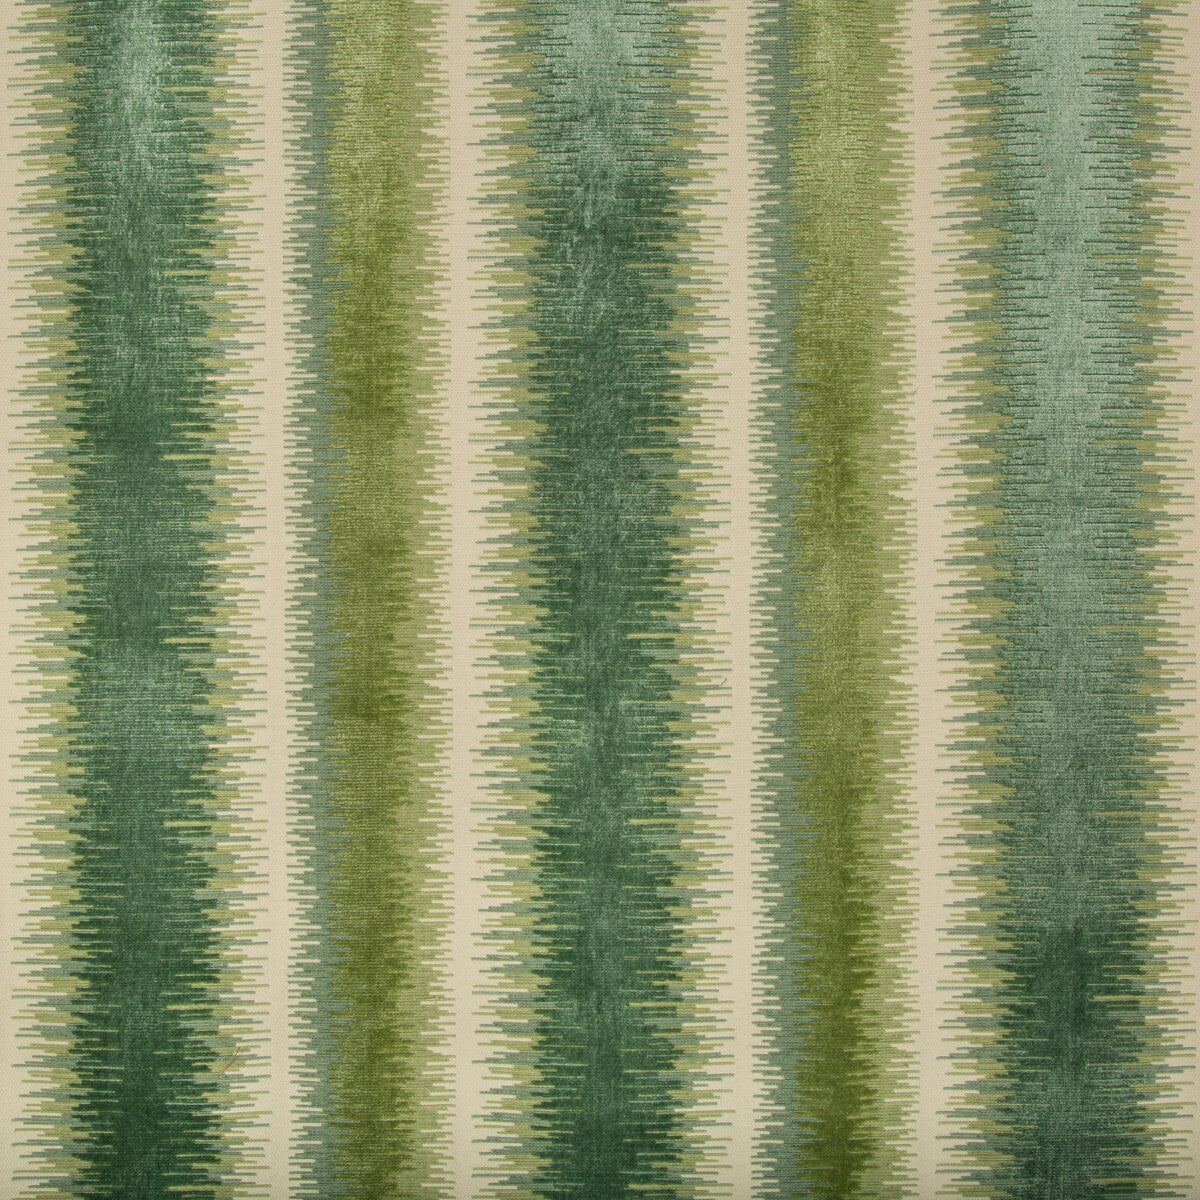 Bromo Velvet fabric in aloe color - pattern 8018115.3.0 - by Brunschwig &amp; Fils in the Baret collection